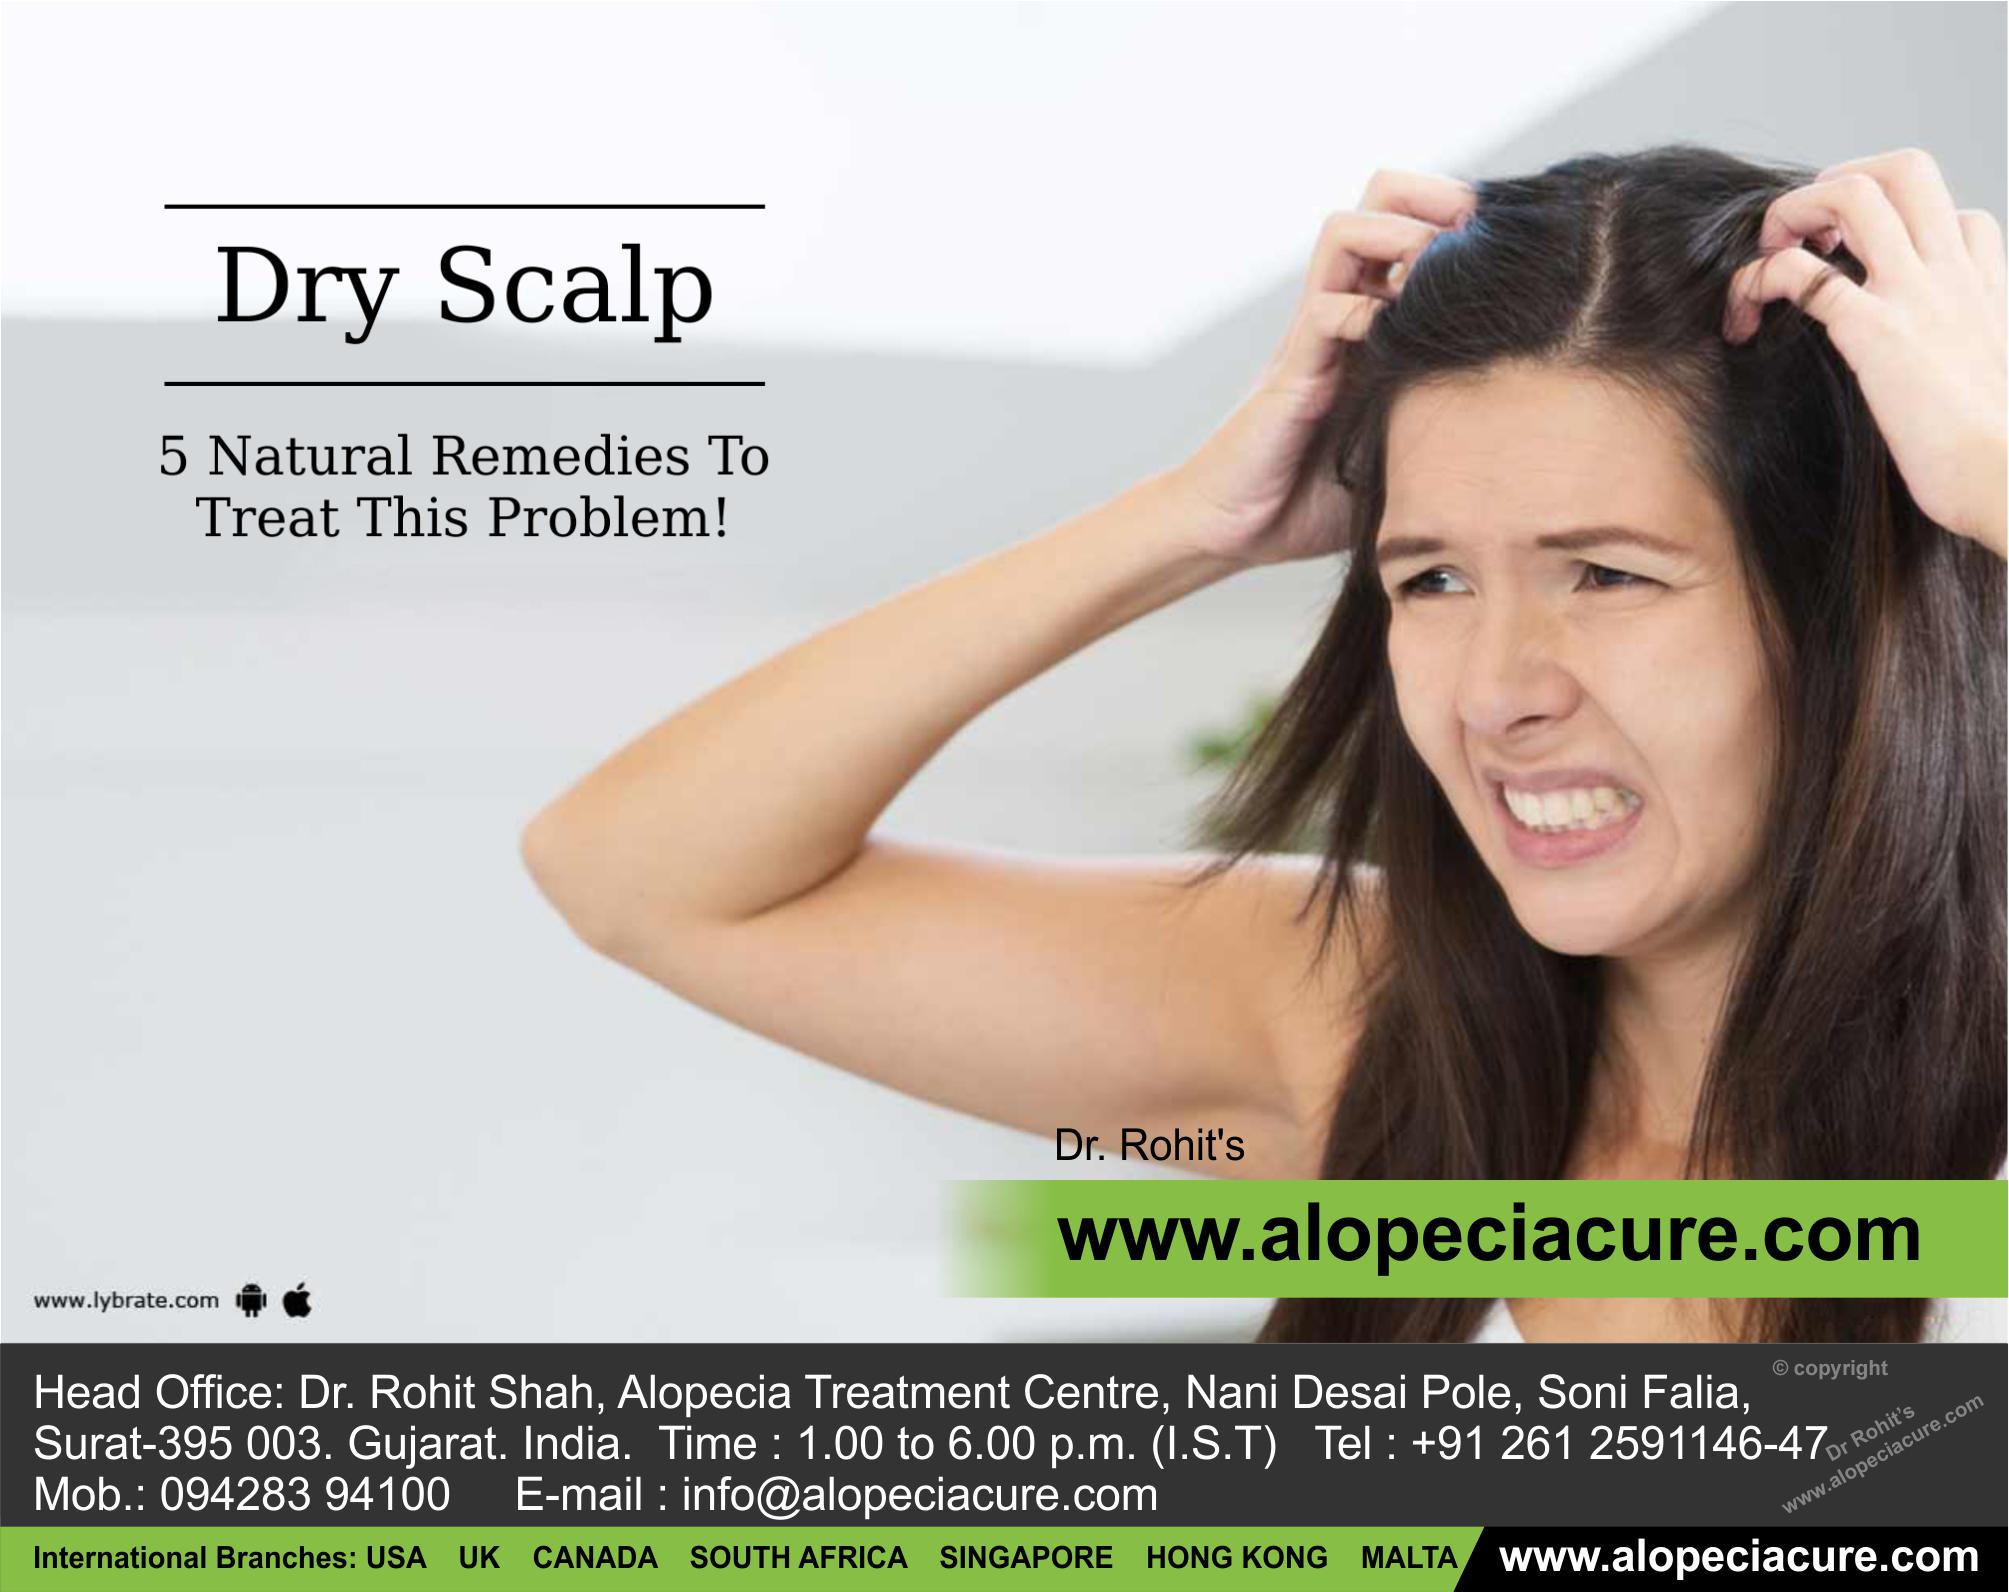 Dry Scalp - 6 Natural Remedies To Treat This Problem!